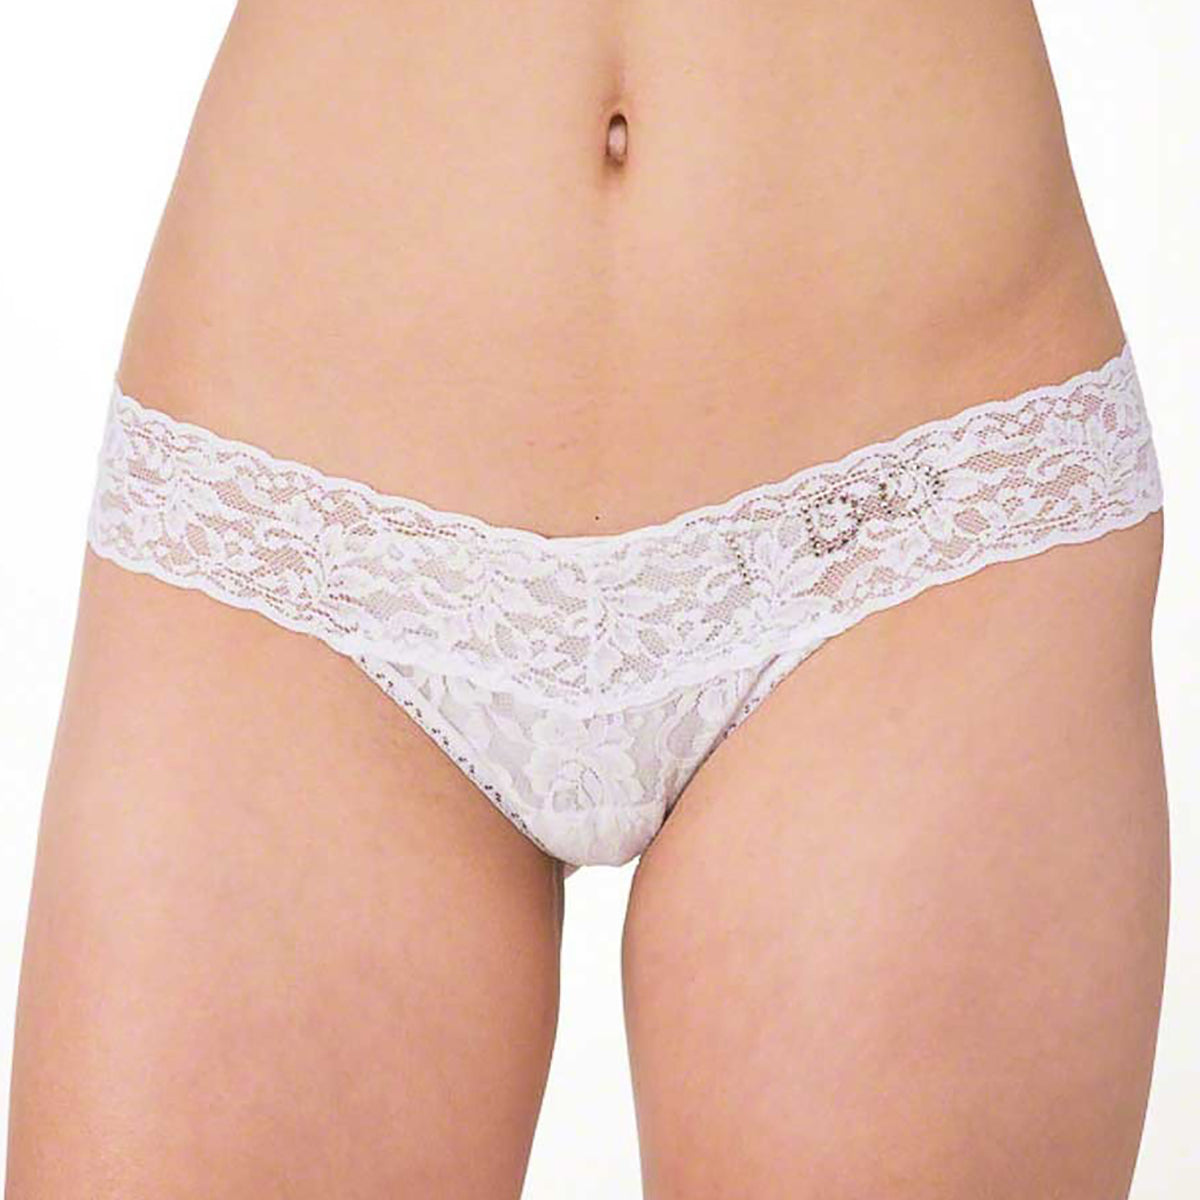 Hanky Panky "I DO" Lace Low Rise Thong 6510 in White